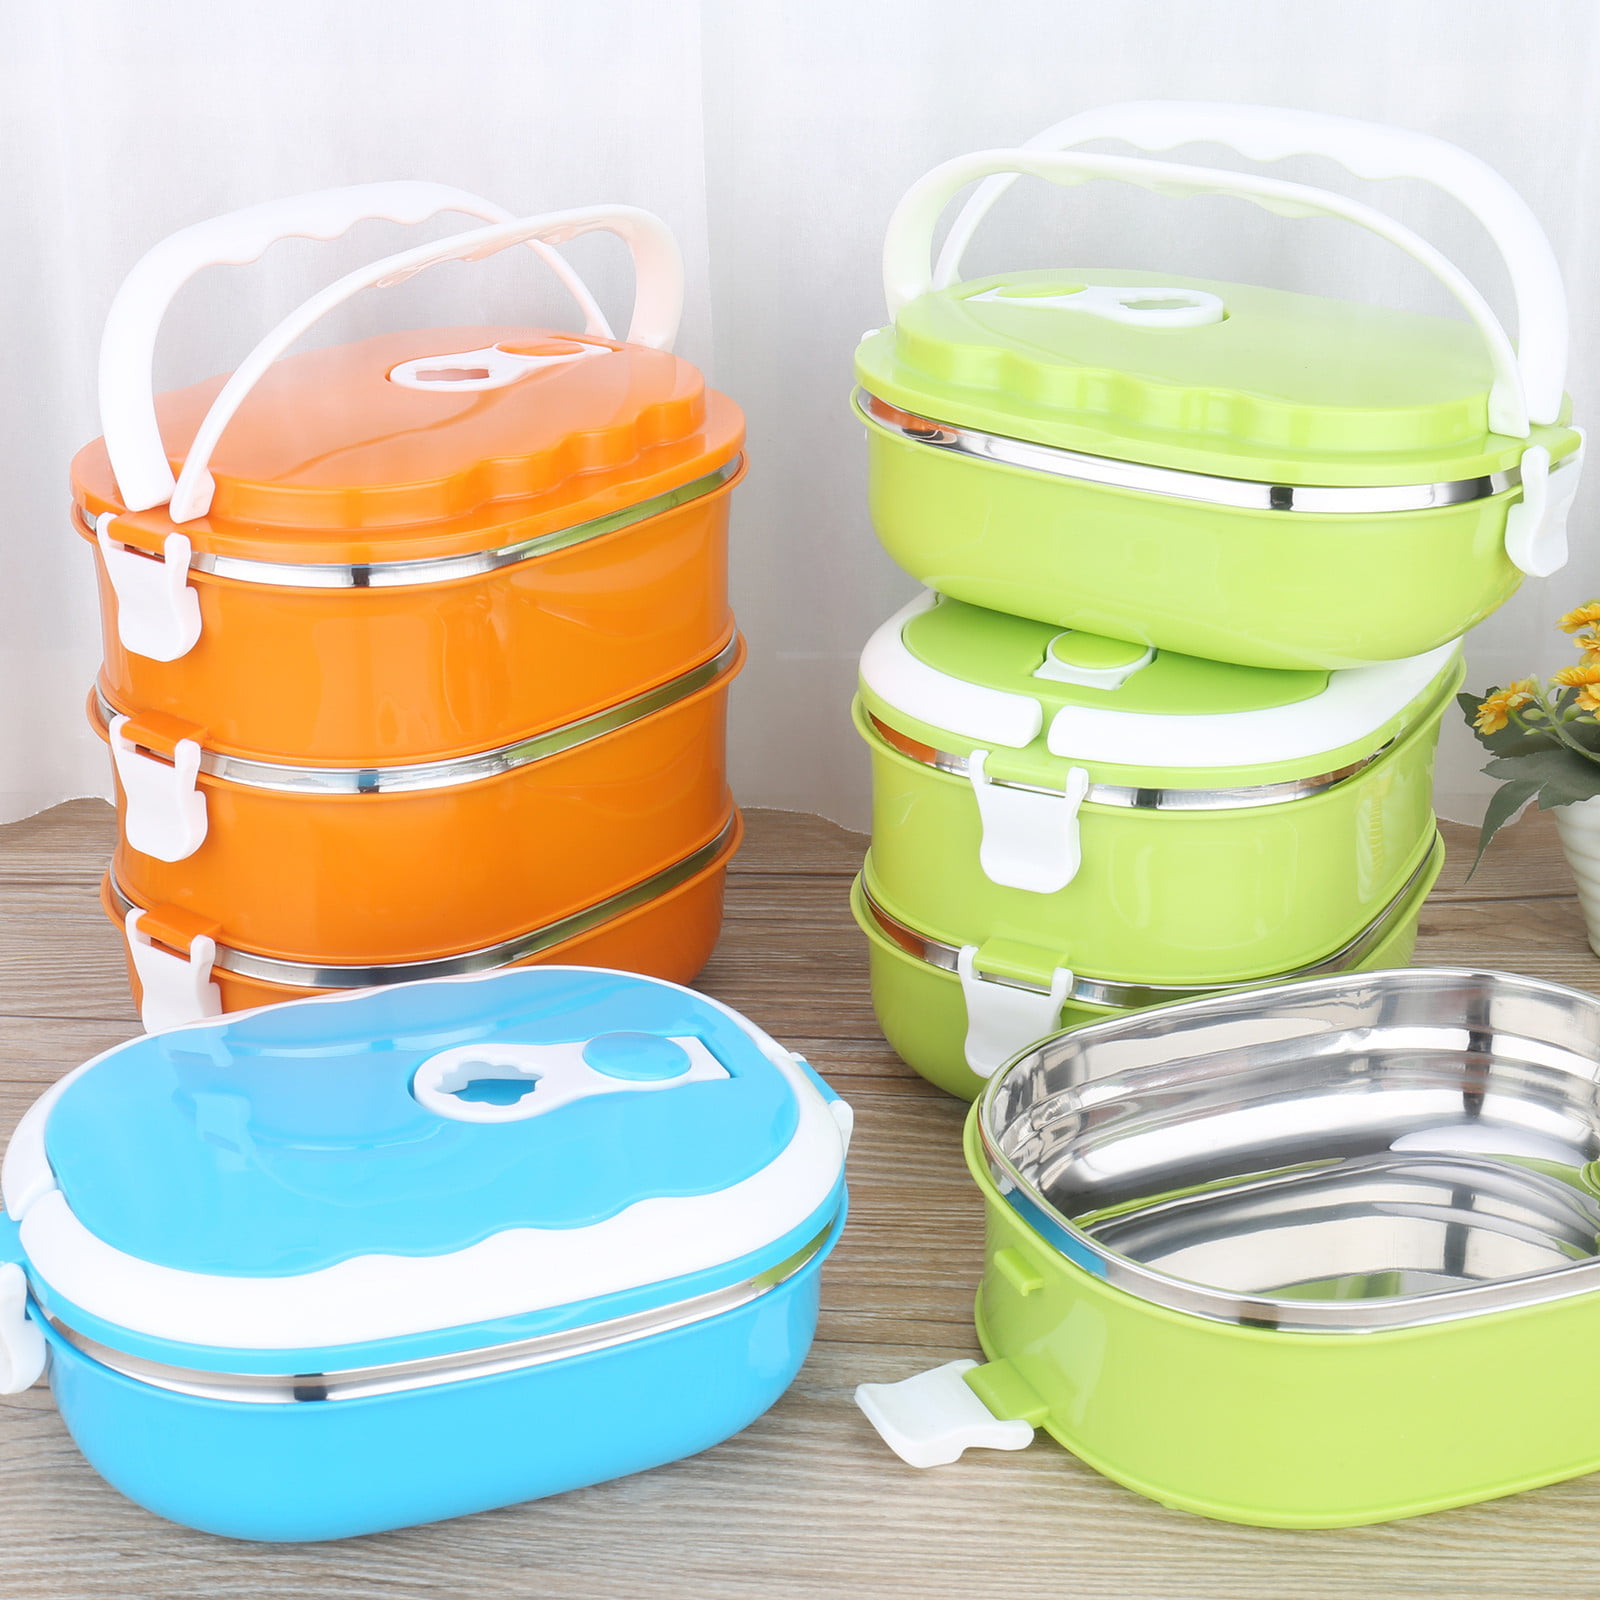 Xmmswdla Stainless Steel Lunch Box 4 Compartments Portable Bento Box for Kids Student or Adult Food Storage Containers with Lids Airtight Soup Bowl 